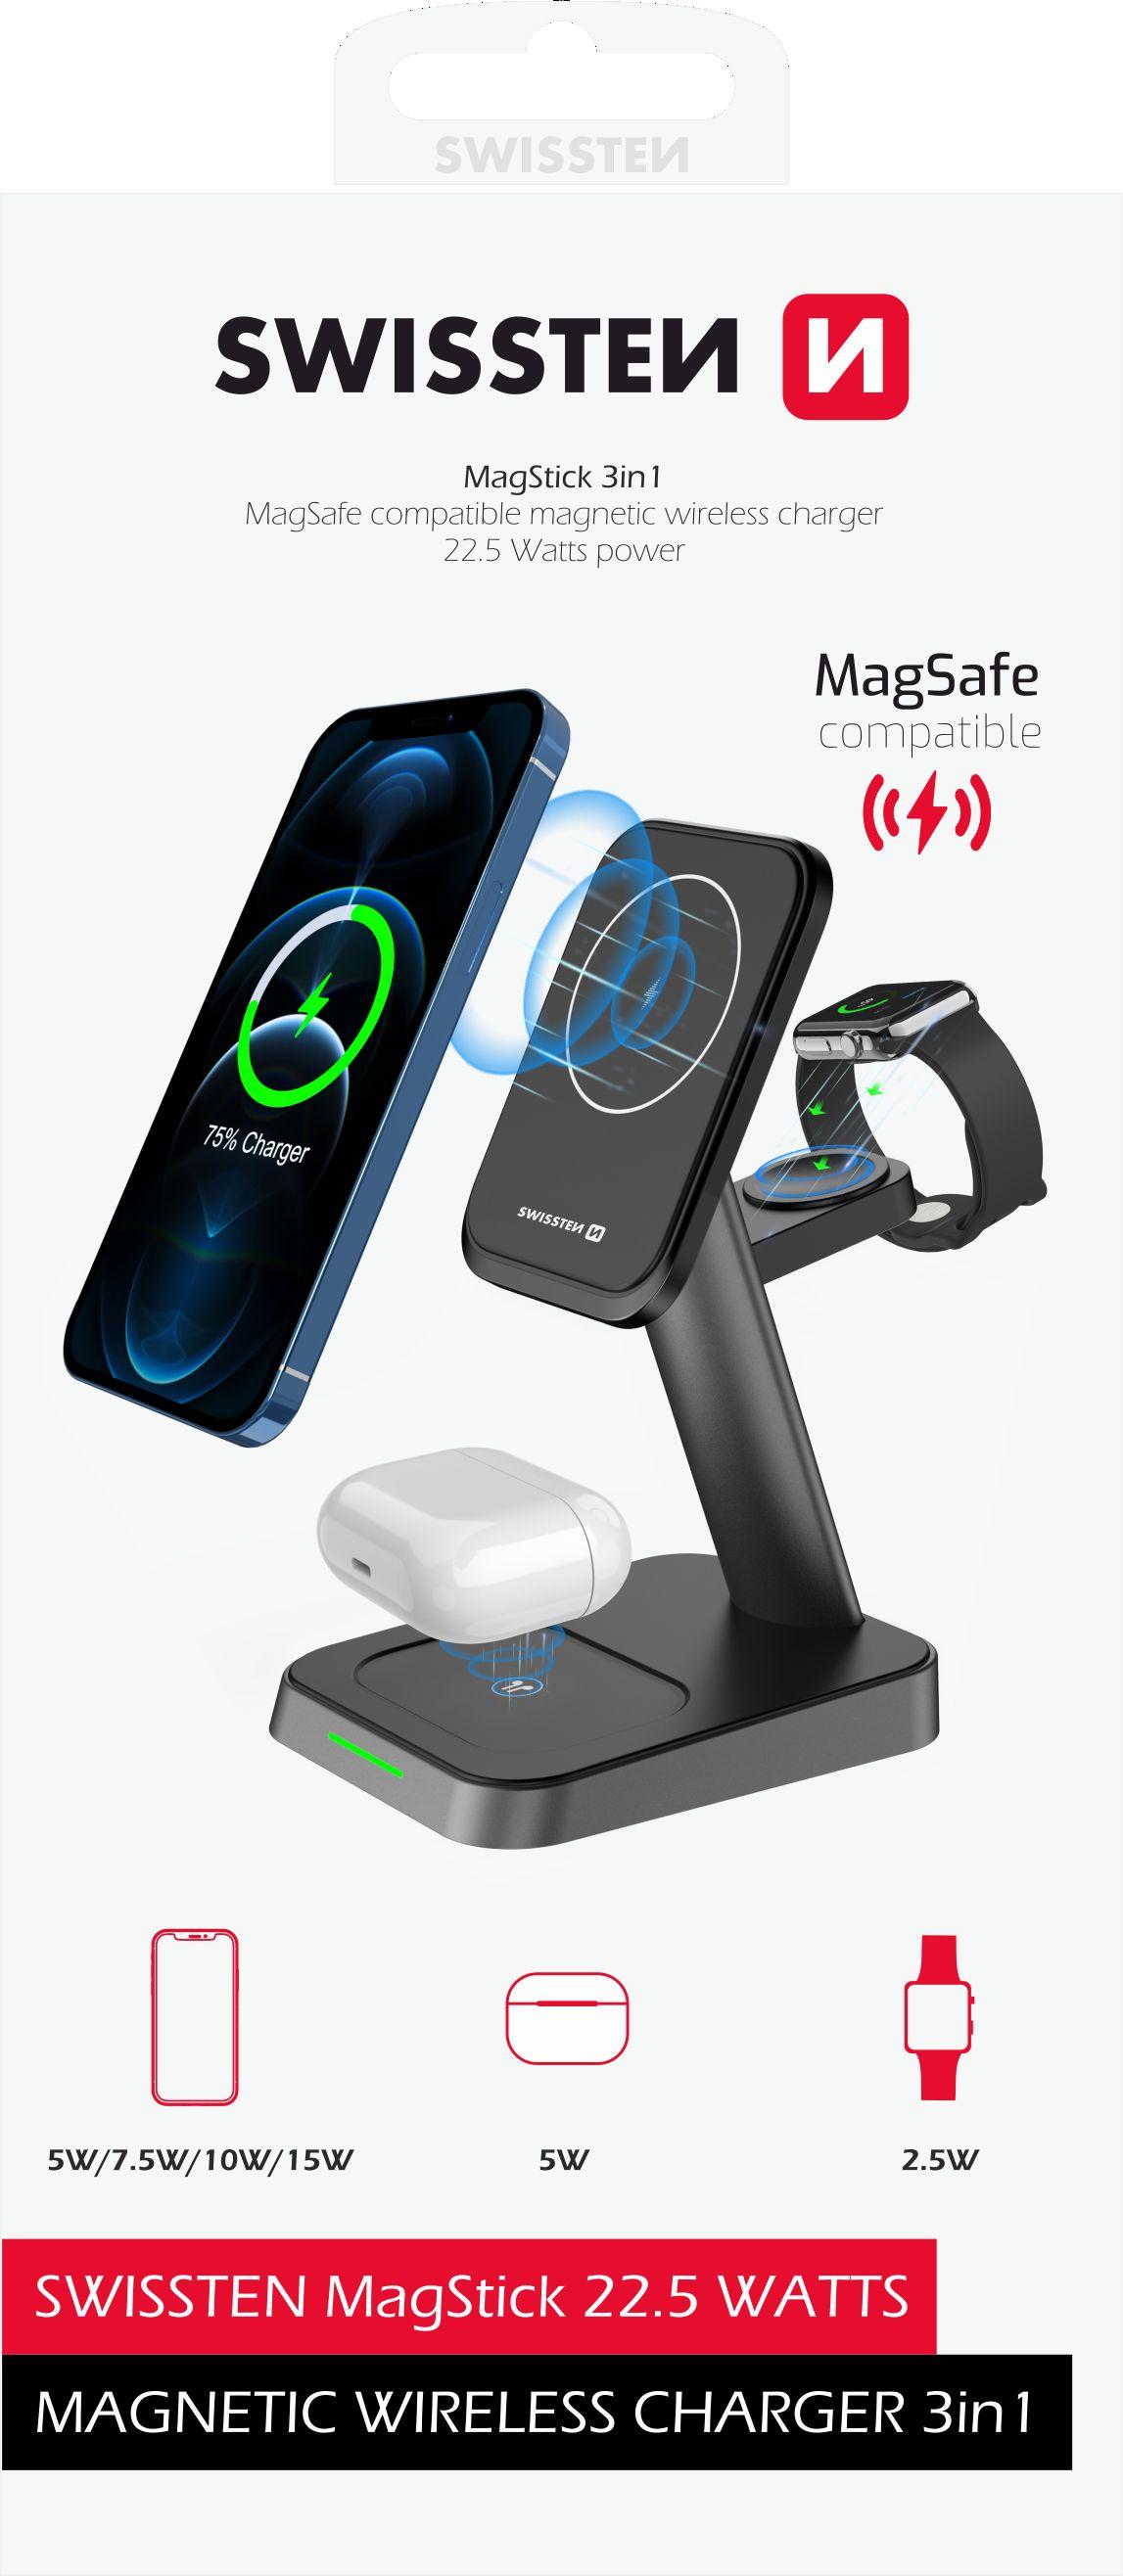 SWISSTEN MagStick WIRELESS CHARGER 3in1 22,5 W MagSafe compatible BLACK